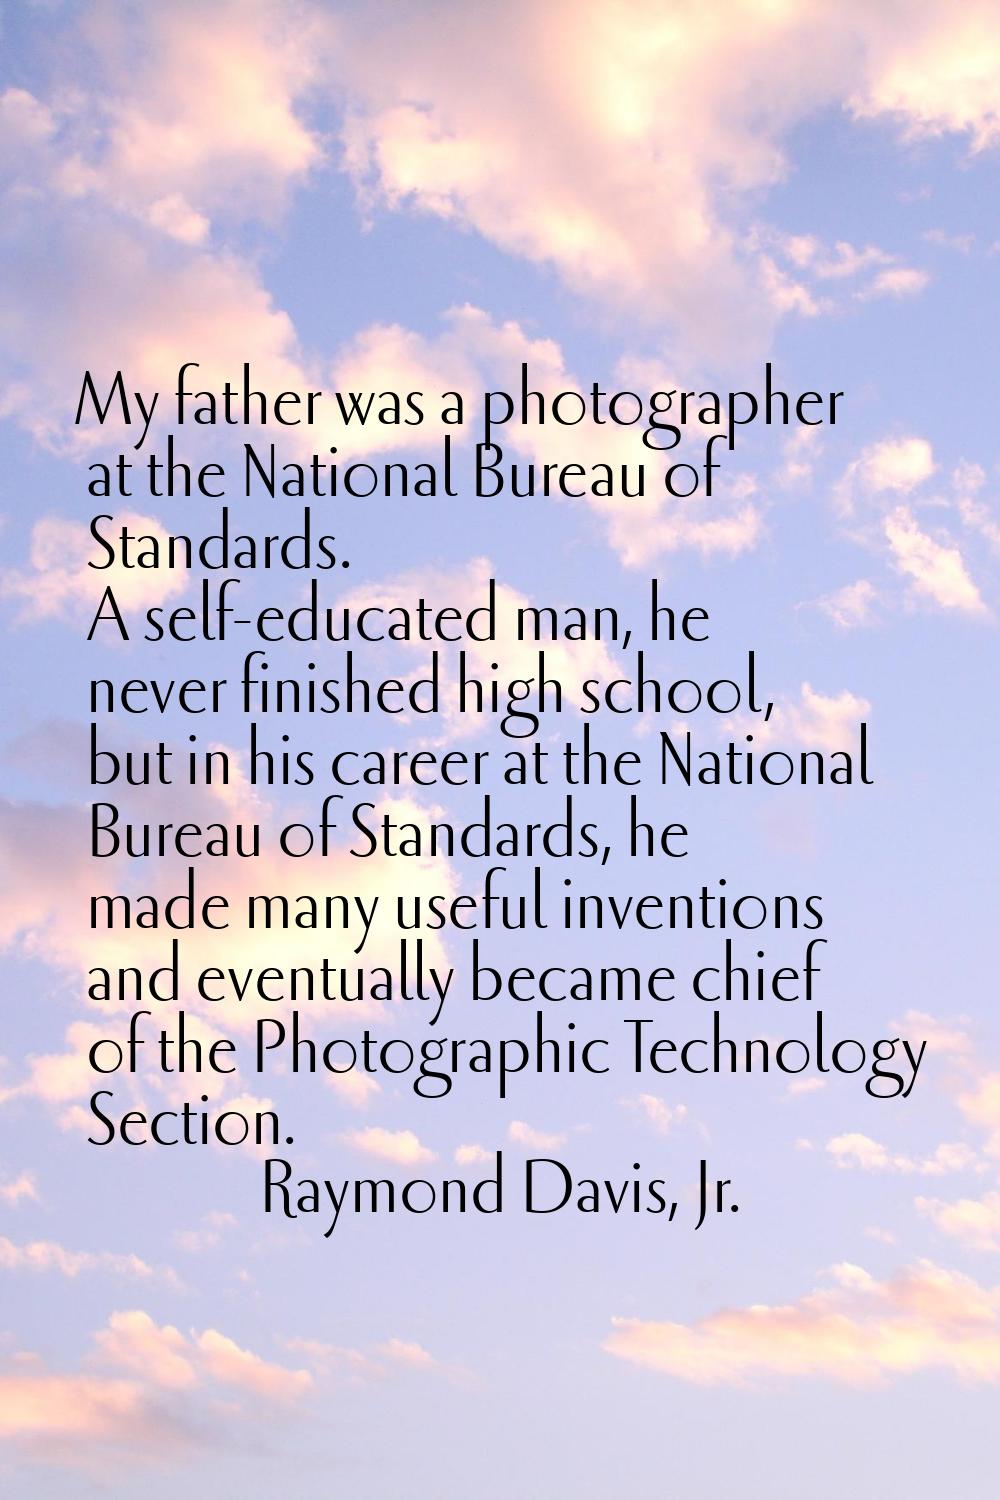 My father was a photographer at the National Bureau of Standards. A self-educated man, he never fin